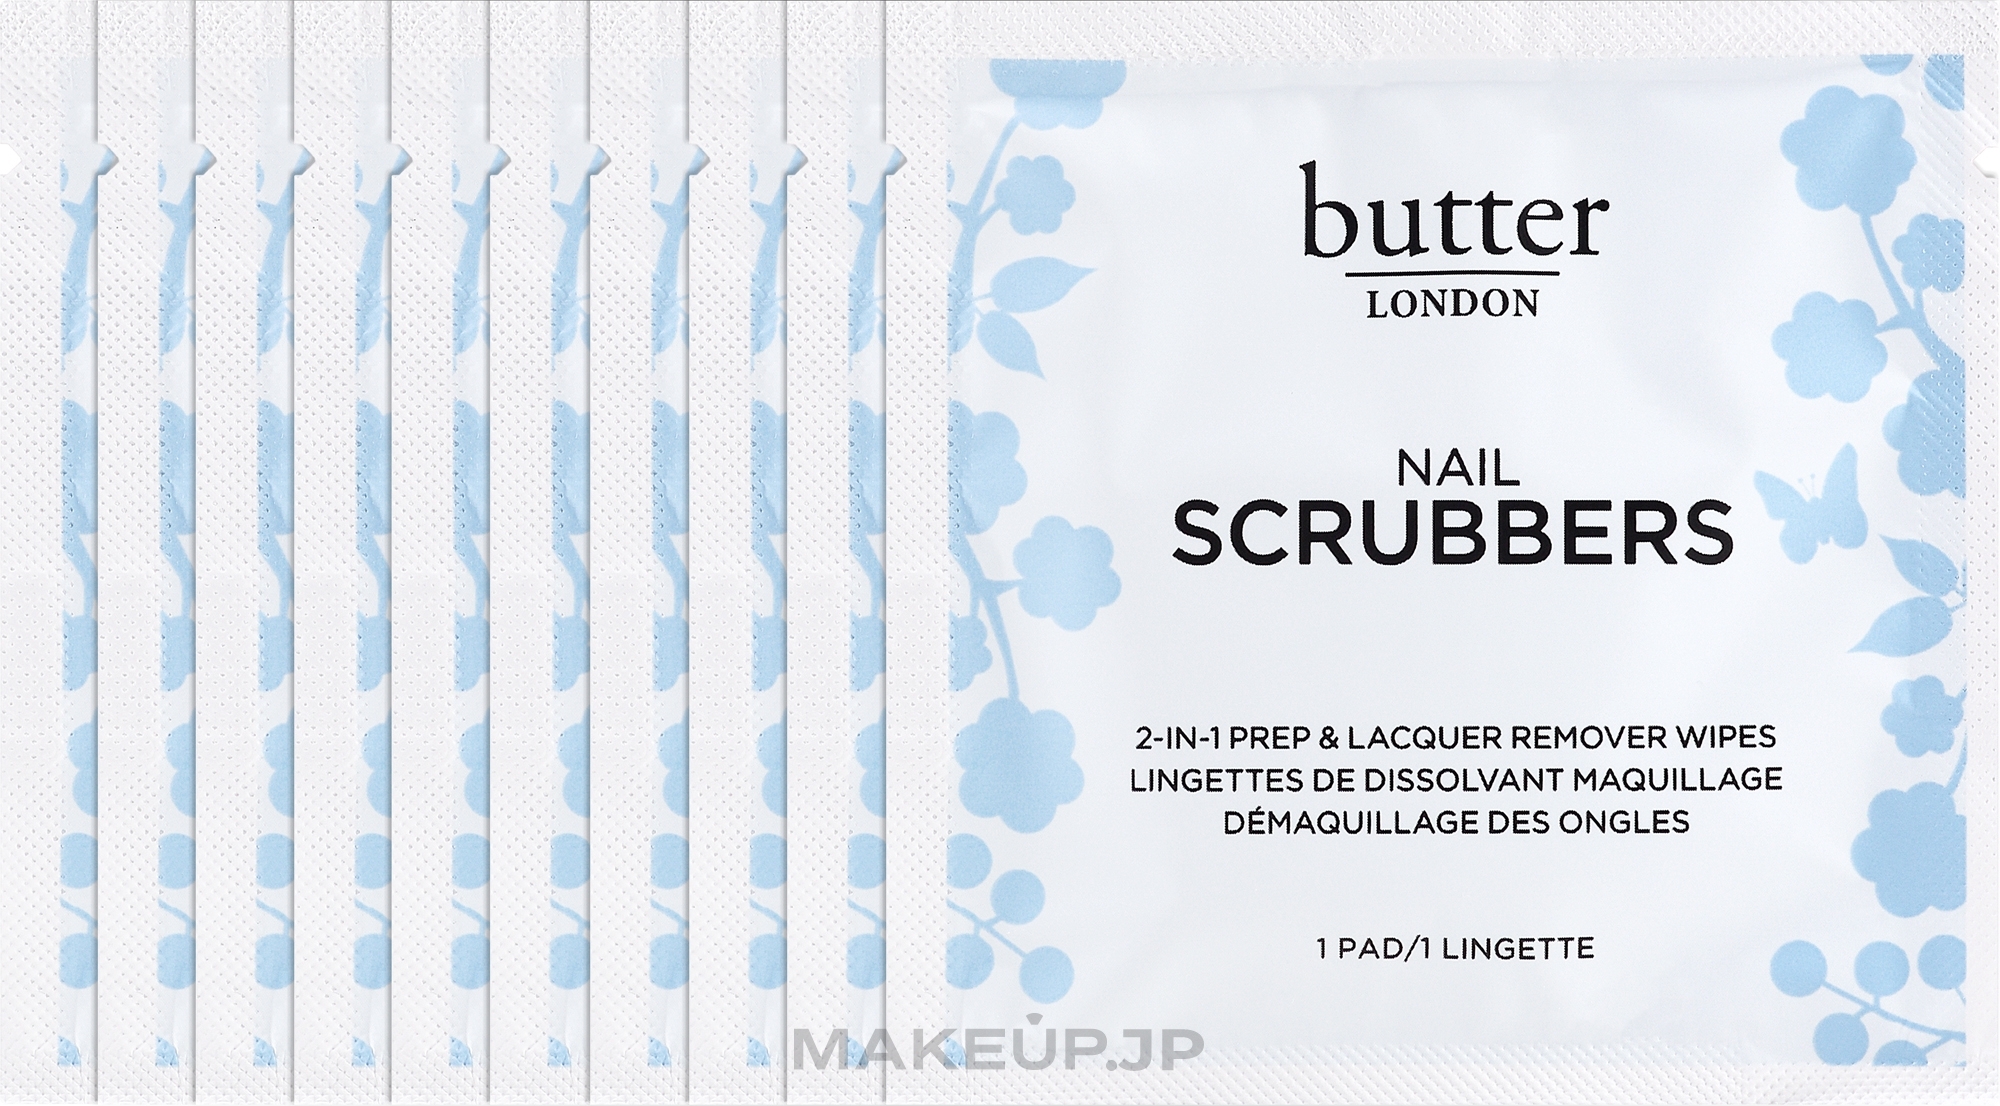 Nail Polish Remover Wipes - Butter London Nail Scrubbers 2-In-1 Prep & Lacquer Remover Wipes — photo 10 szt.